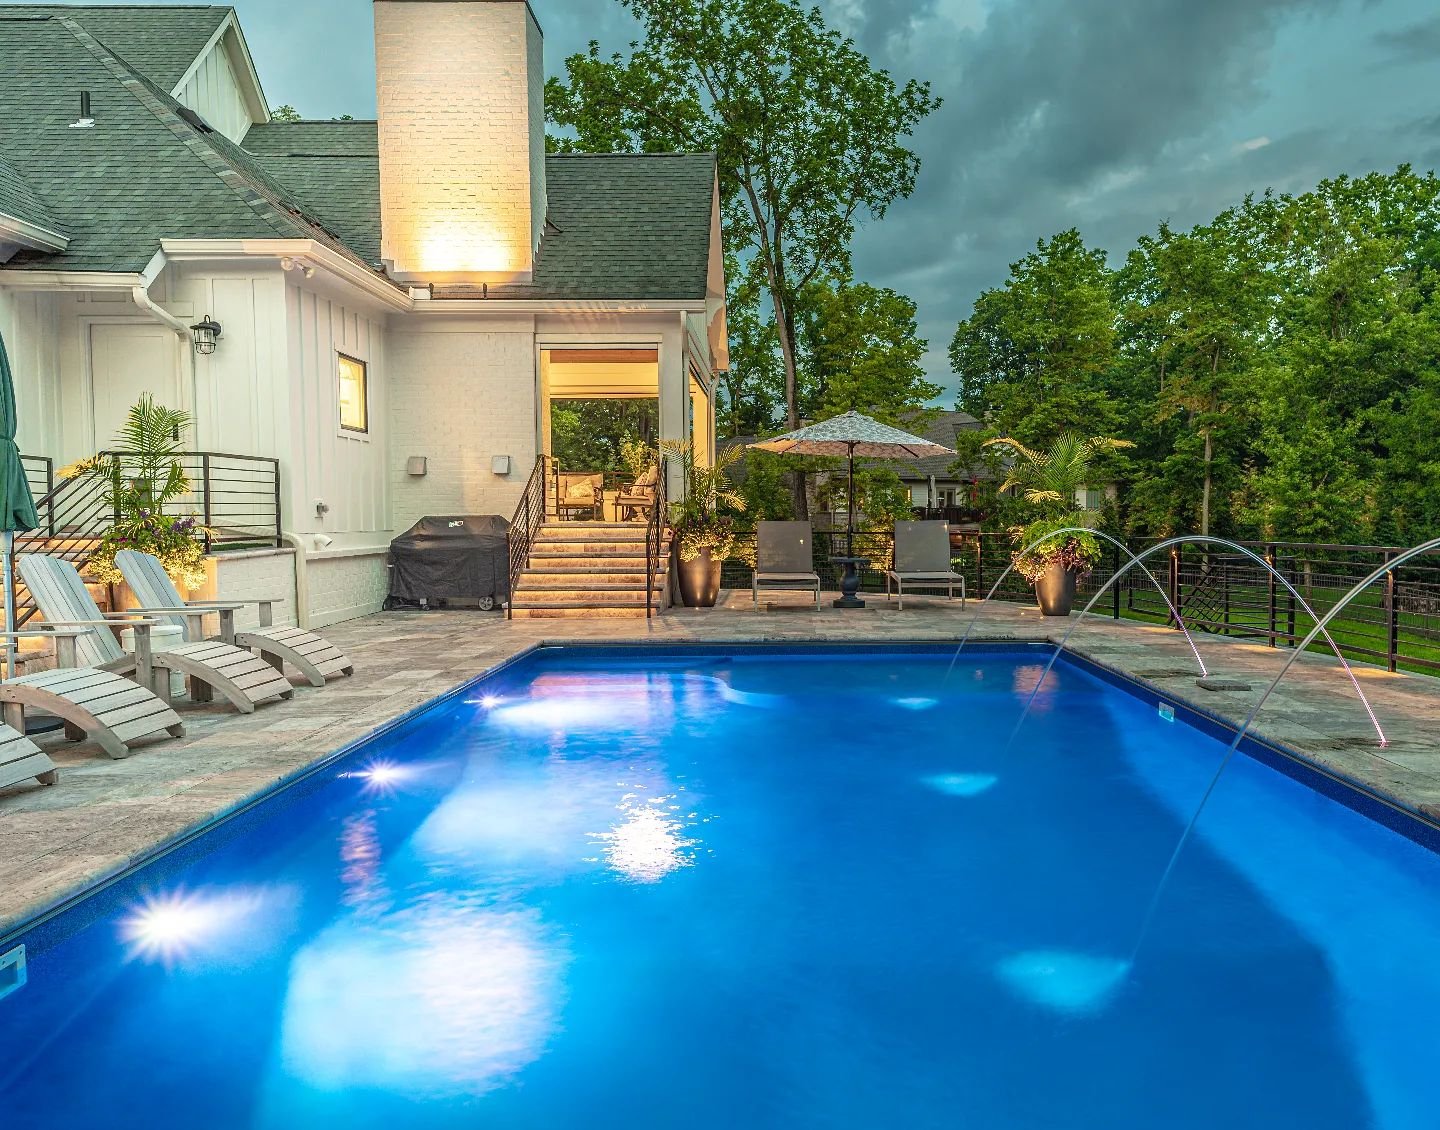 More and more people are having us build pools when we're constructing their home. Here&rsquo;s a peek at one we just finished - perfect for both chill nights and big parties. Who else wants to jump in? 😄

#PoolLife #HomeDesign #Staycation #SummerVi